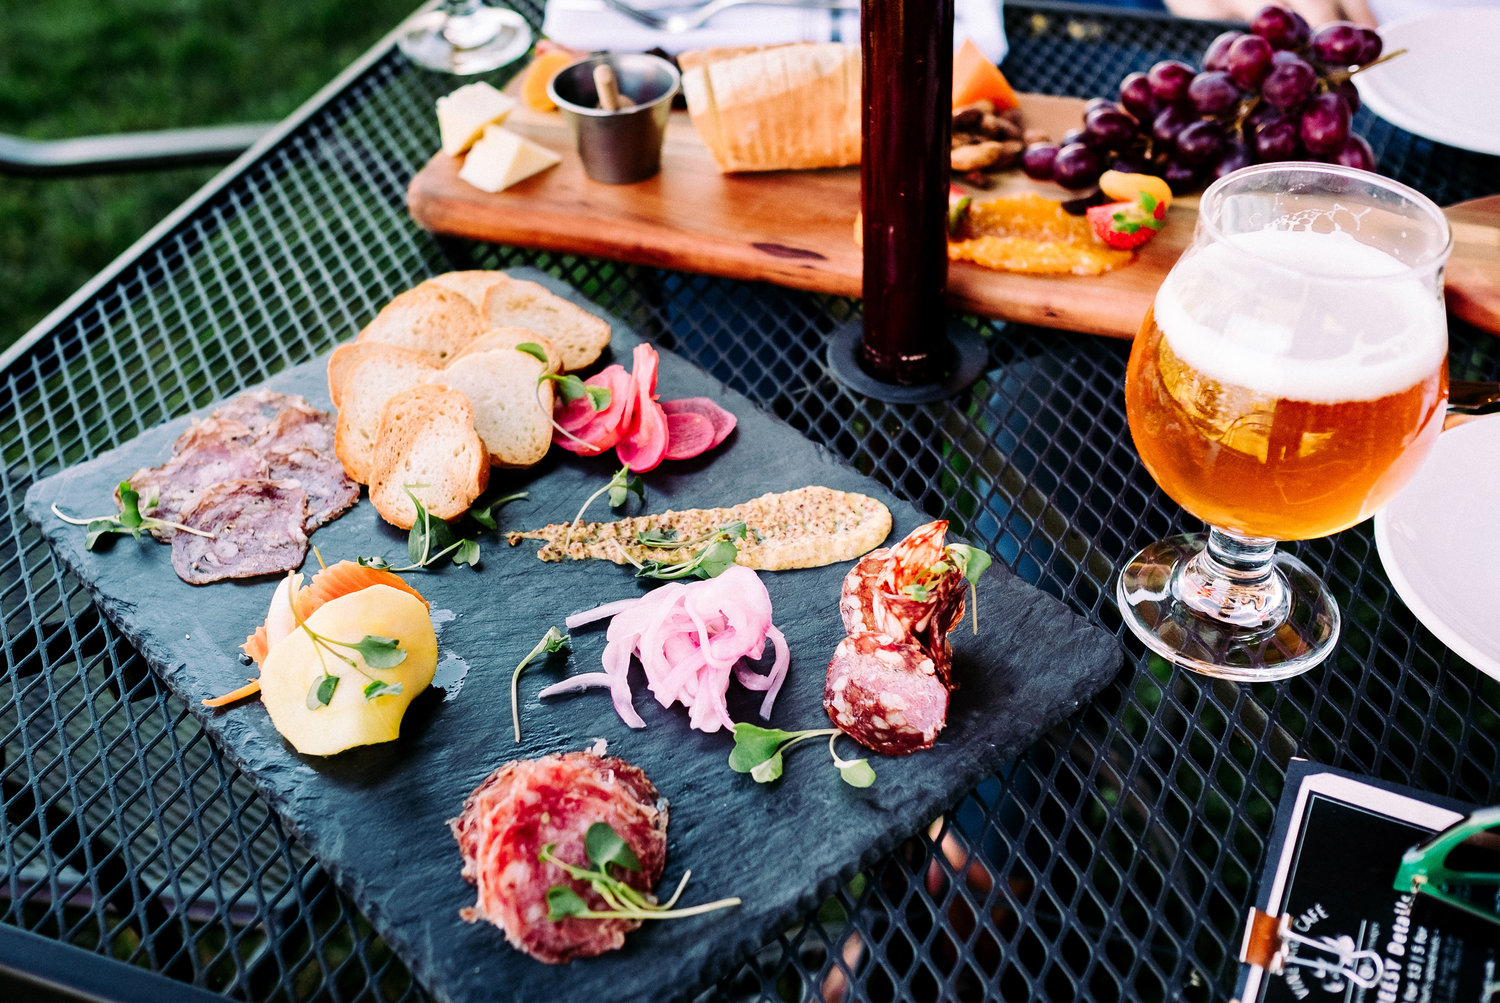 A tasting board starring local goods to pair with Taproot beer